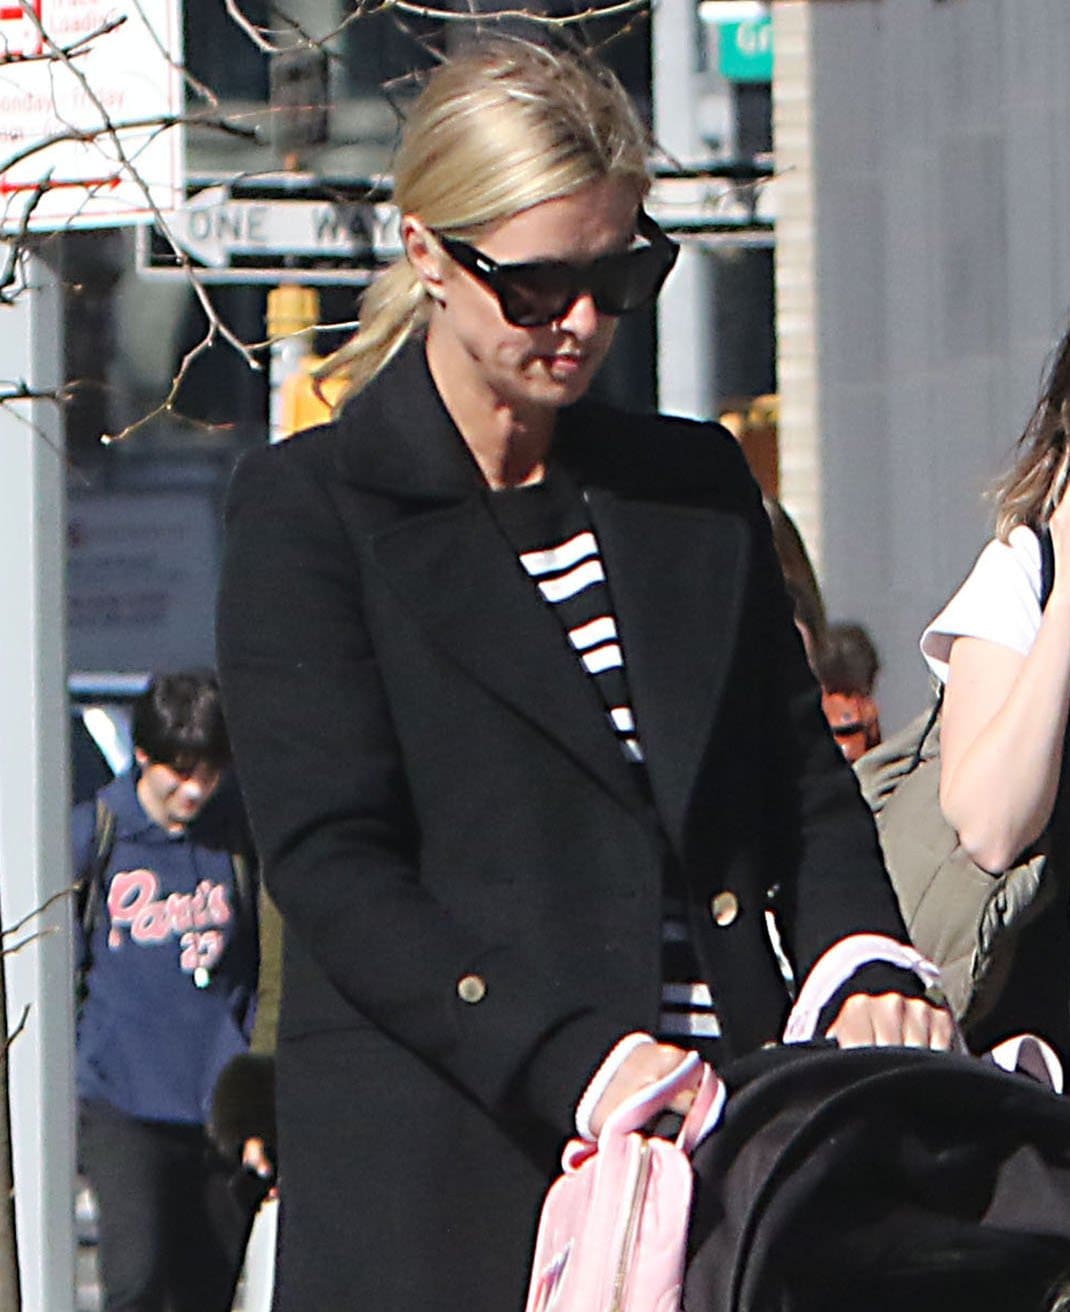 Nicky Hilton casually ties her blonde hair into a low ponytail and wears minimal makeup